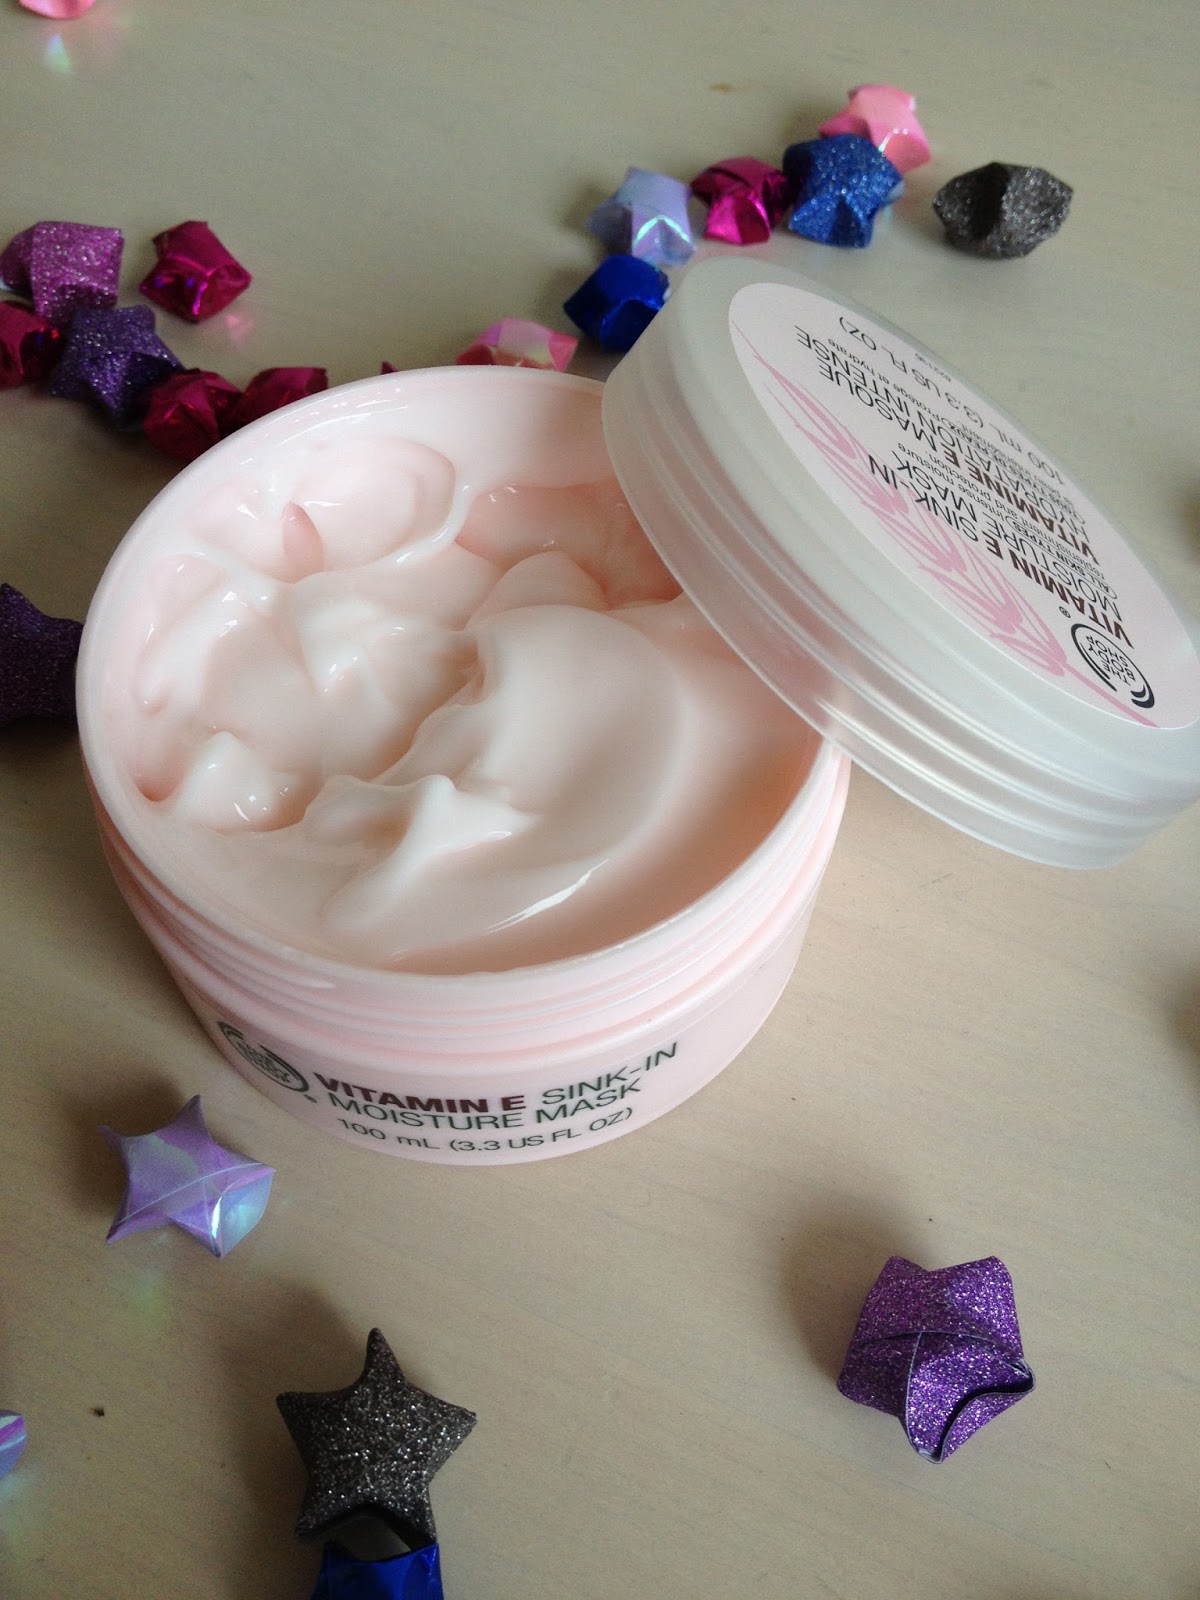 Obviobsessions Review The Body Shop Vitamin E Sink In